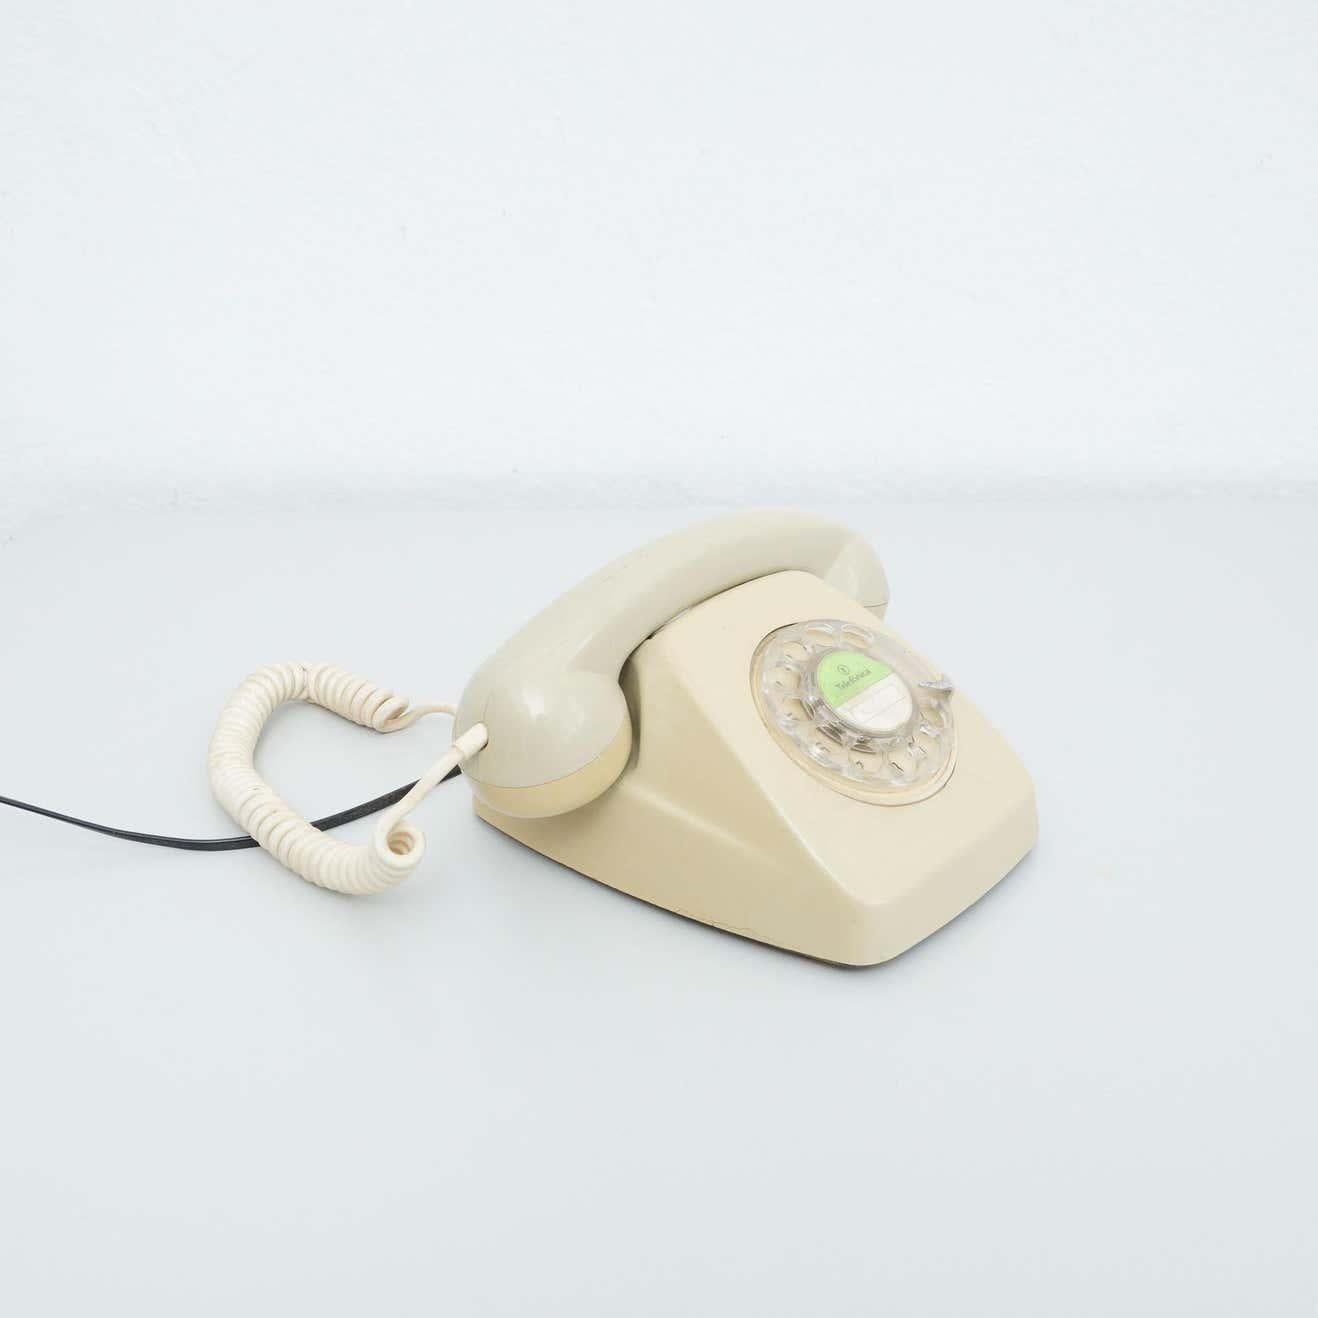 Mid-Century Modern Vintage Spanish Analog Telephone by Telefonica, circa 1980 For Sale